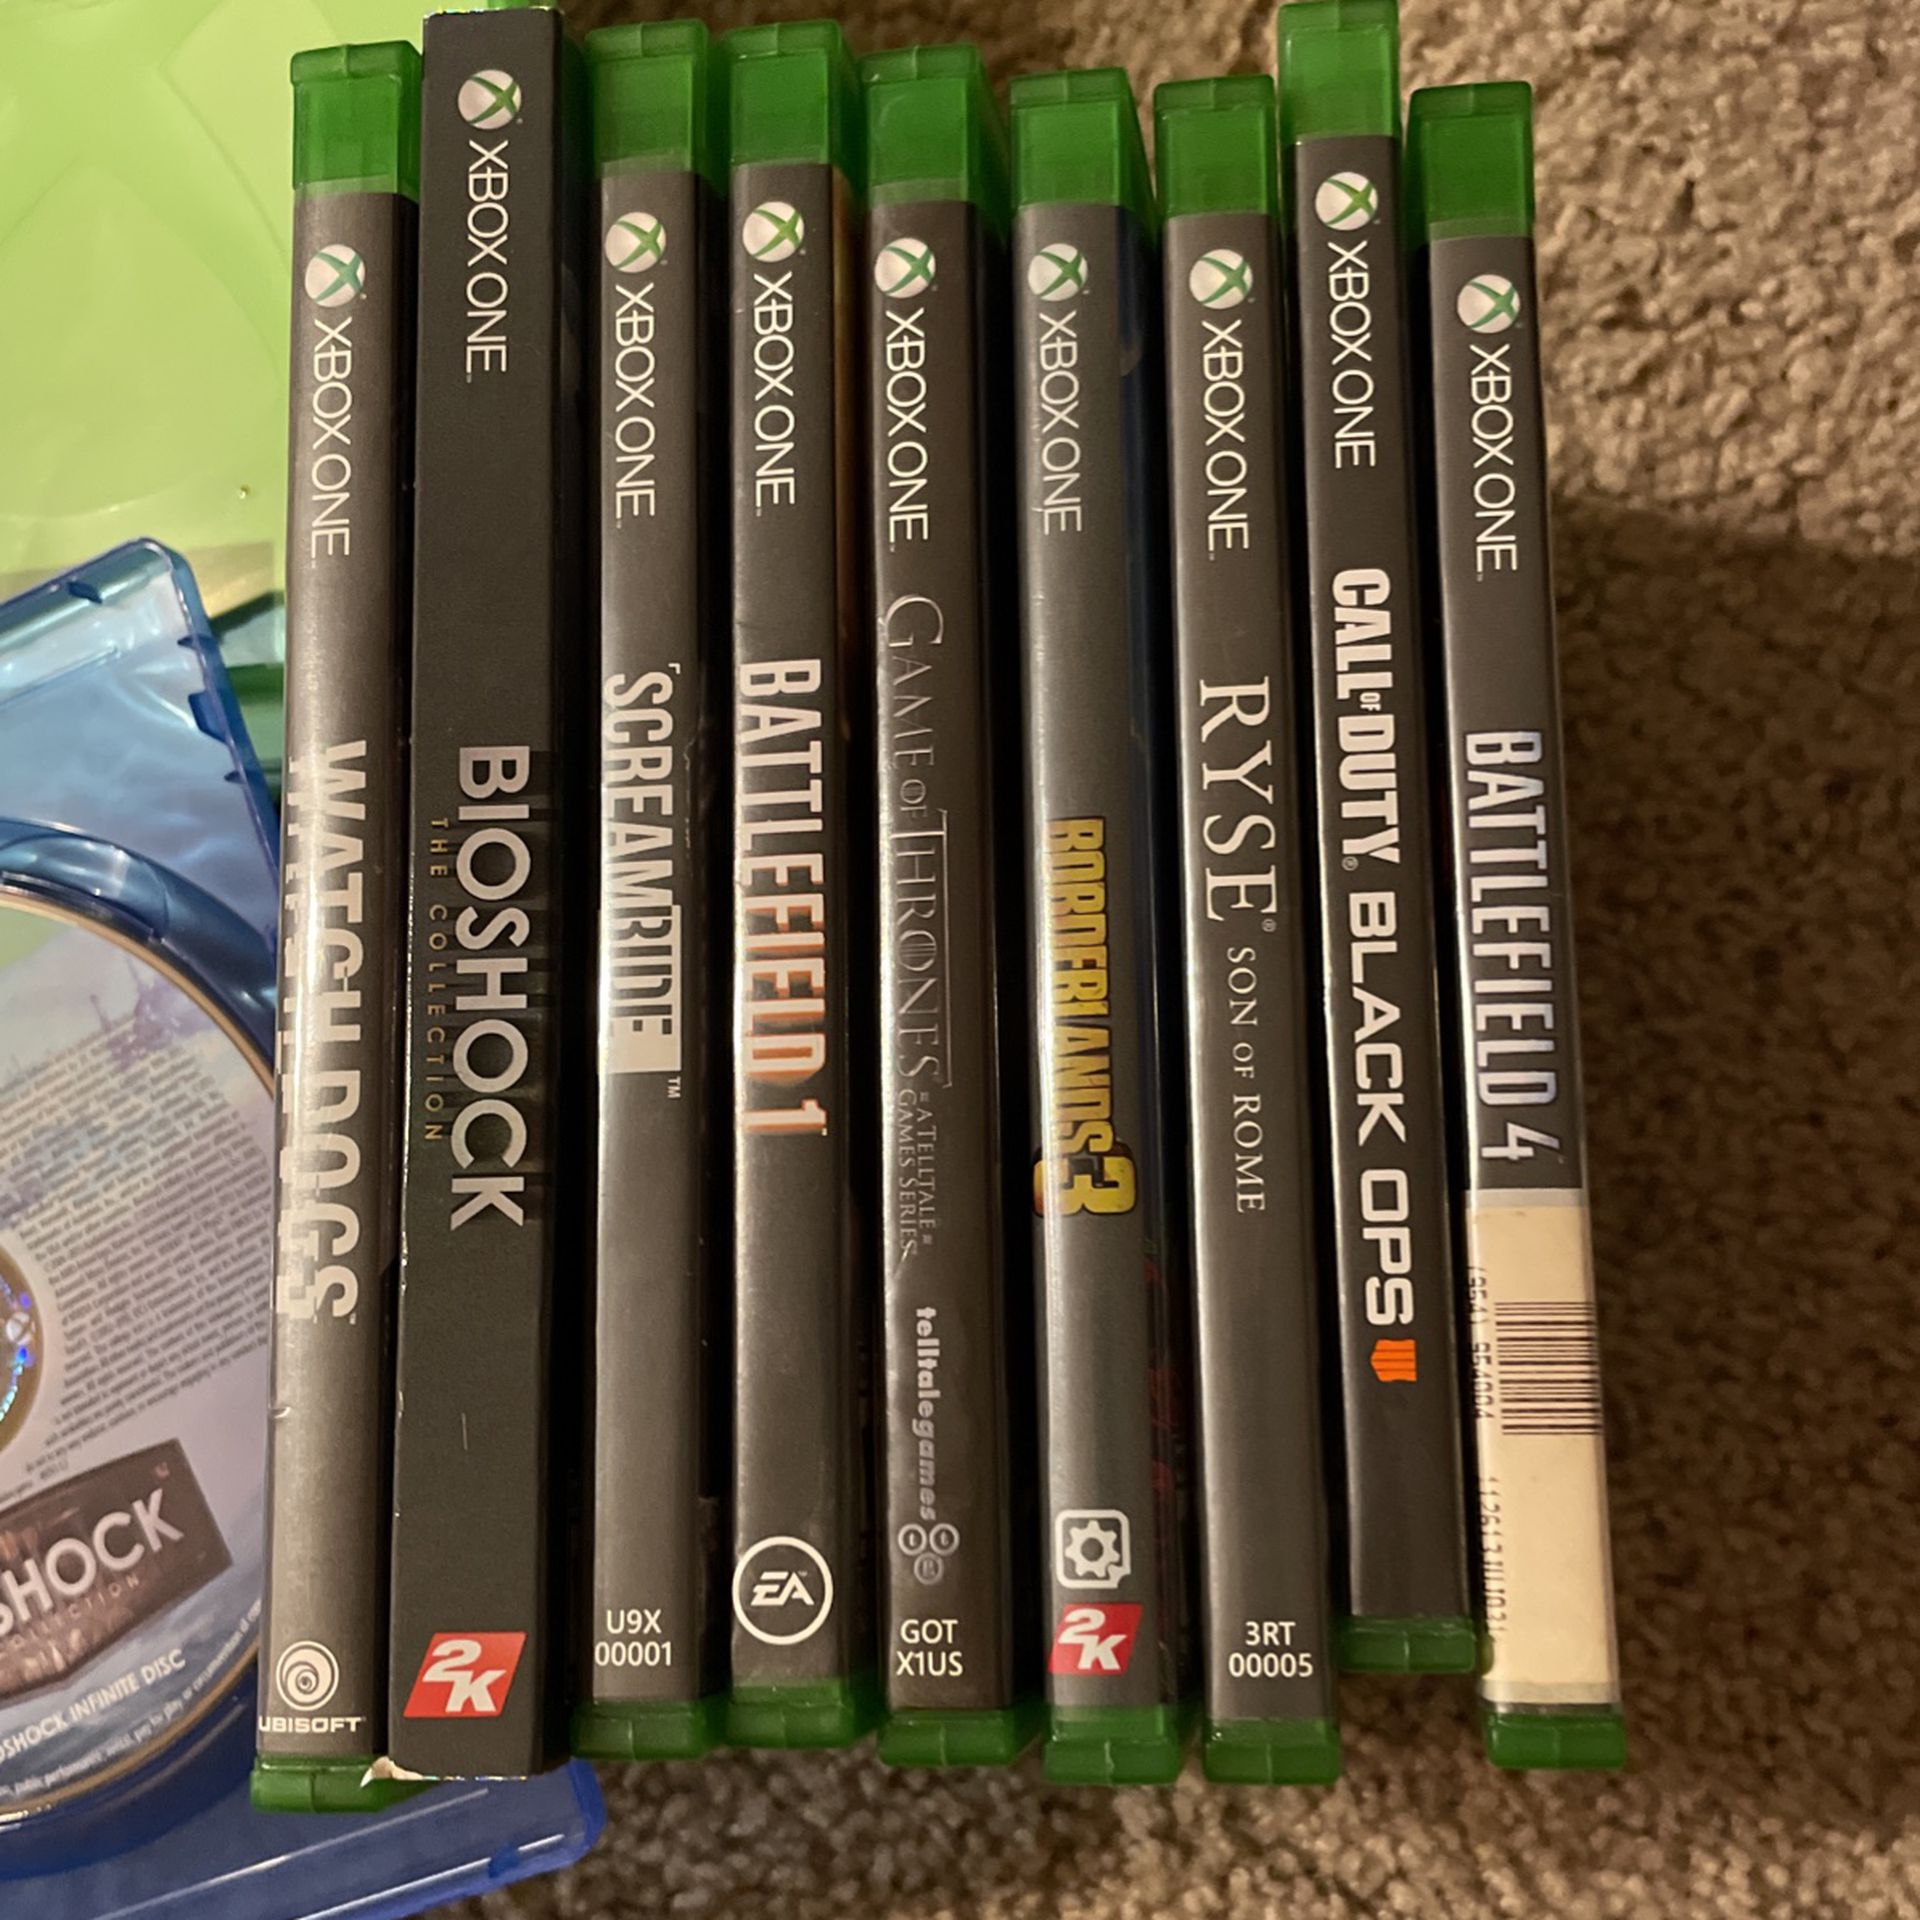 Xbox one Games 